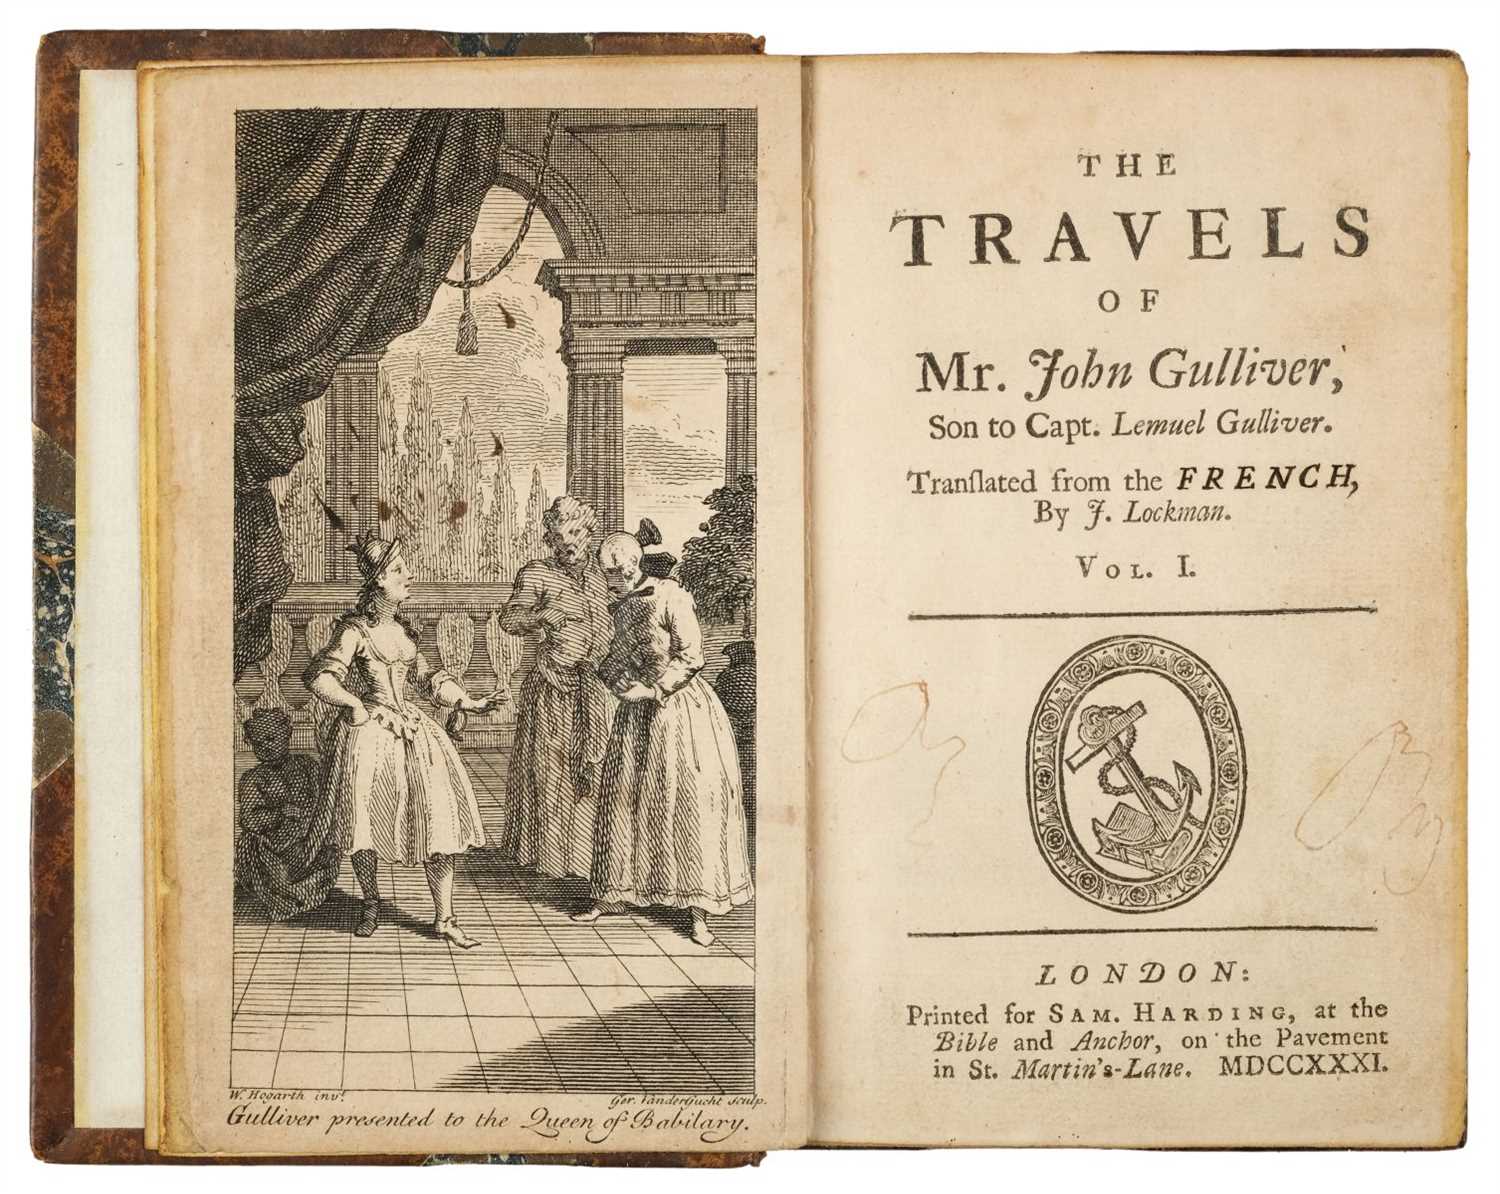 Lot 163 - Desfontaines (Pierre-Francois Guyot). The Travels of Mr. John Gulliver, 1731